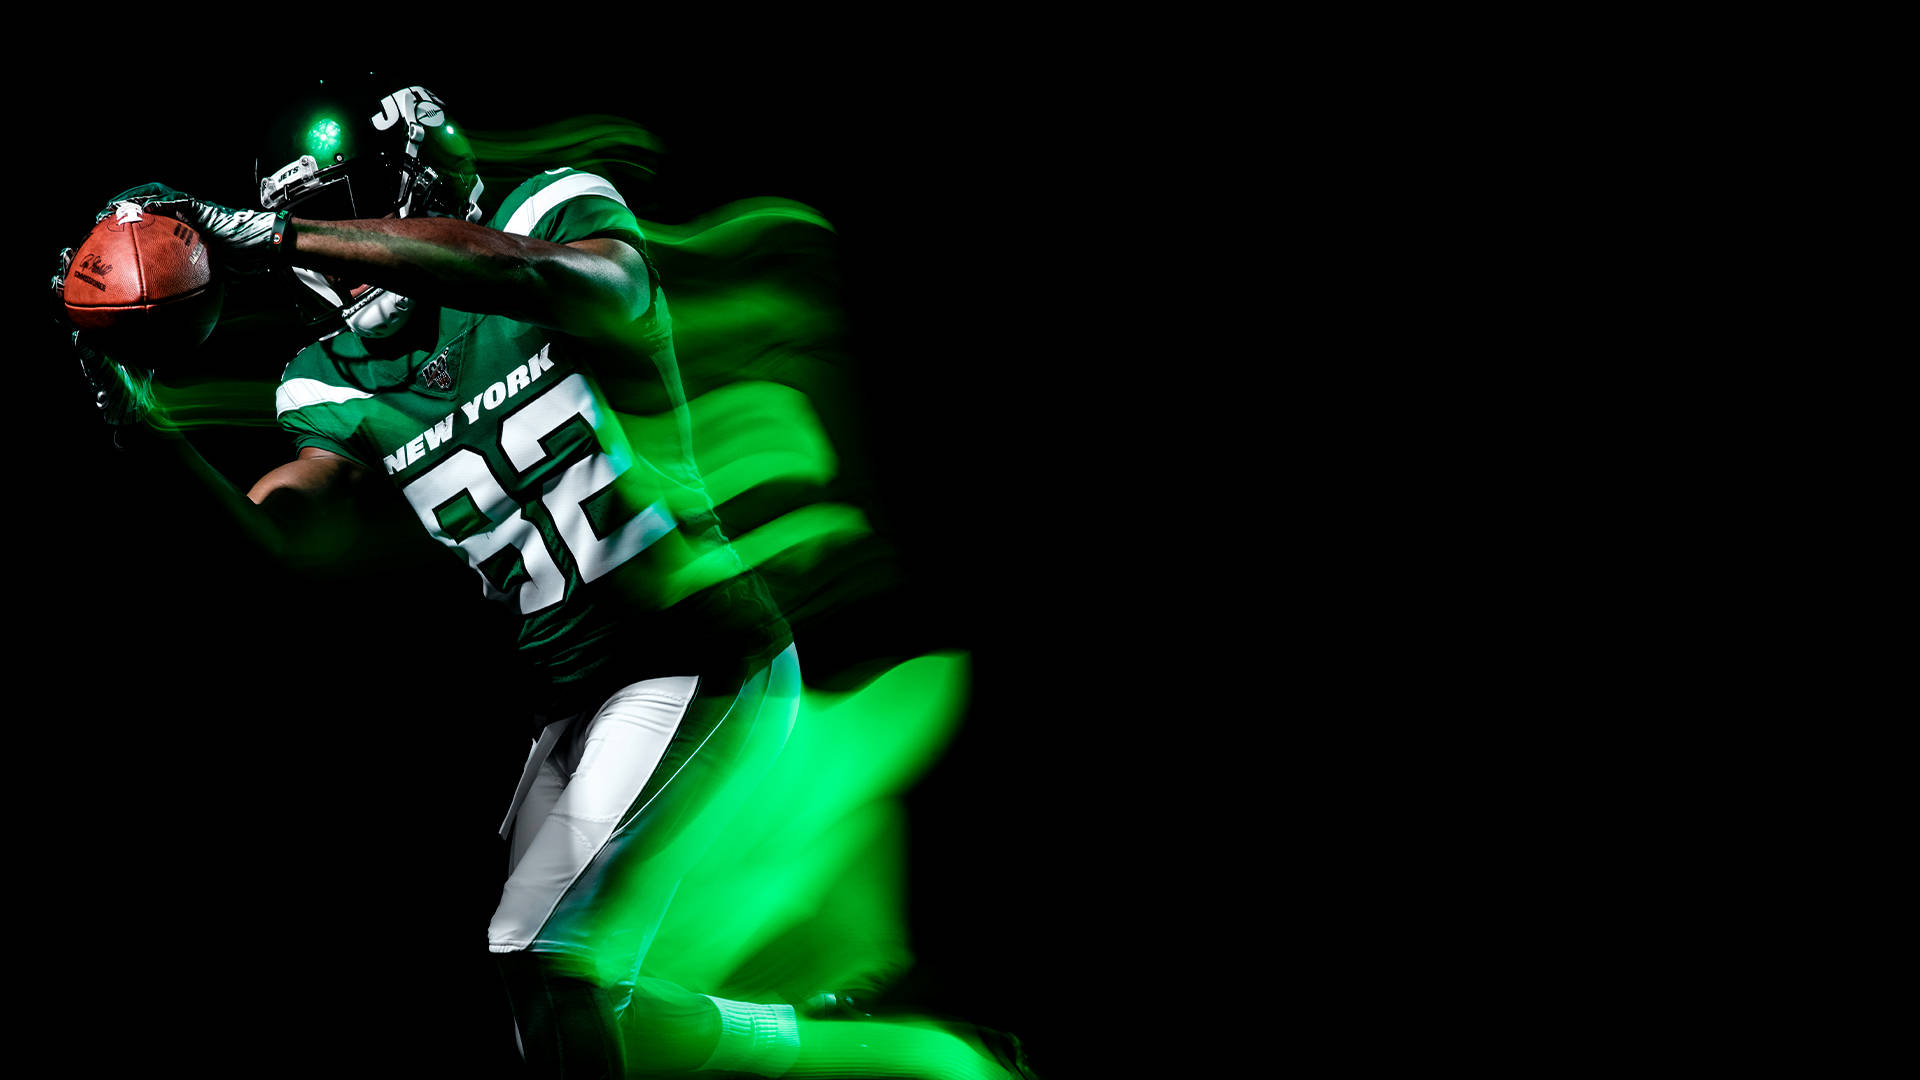 NY Jets Player Glowing Wallpaper